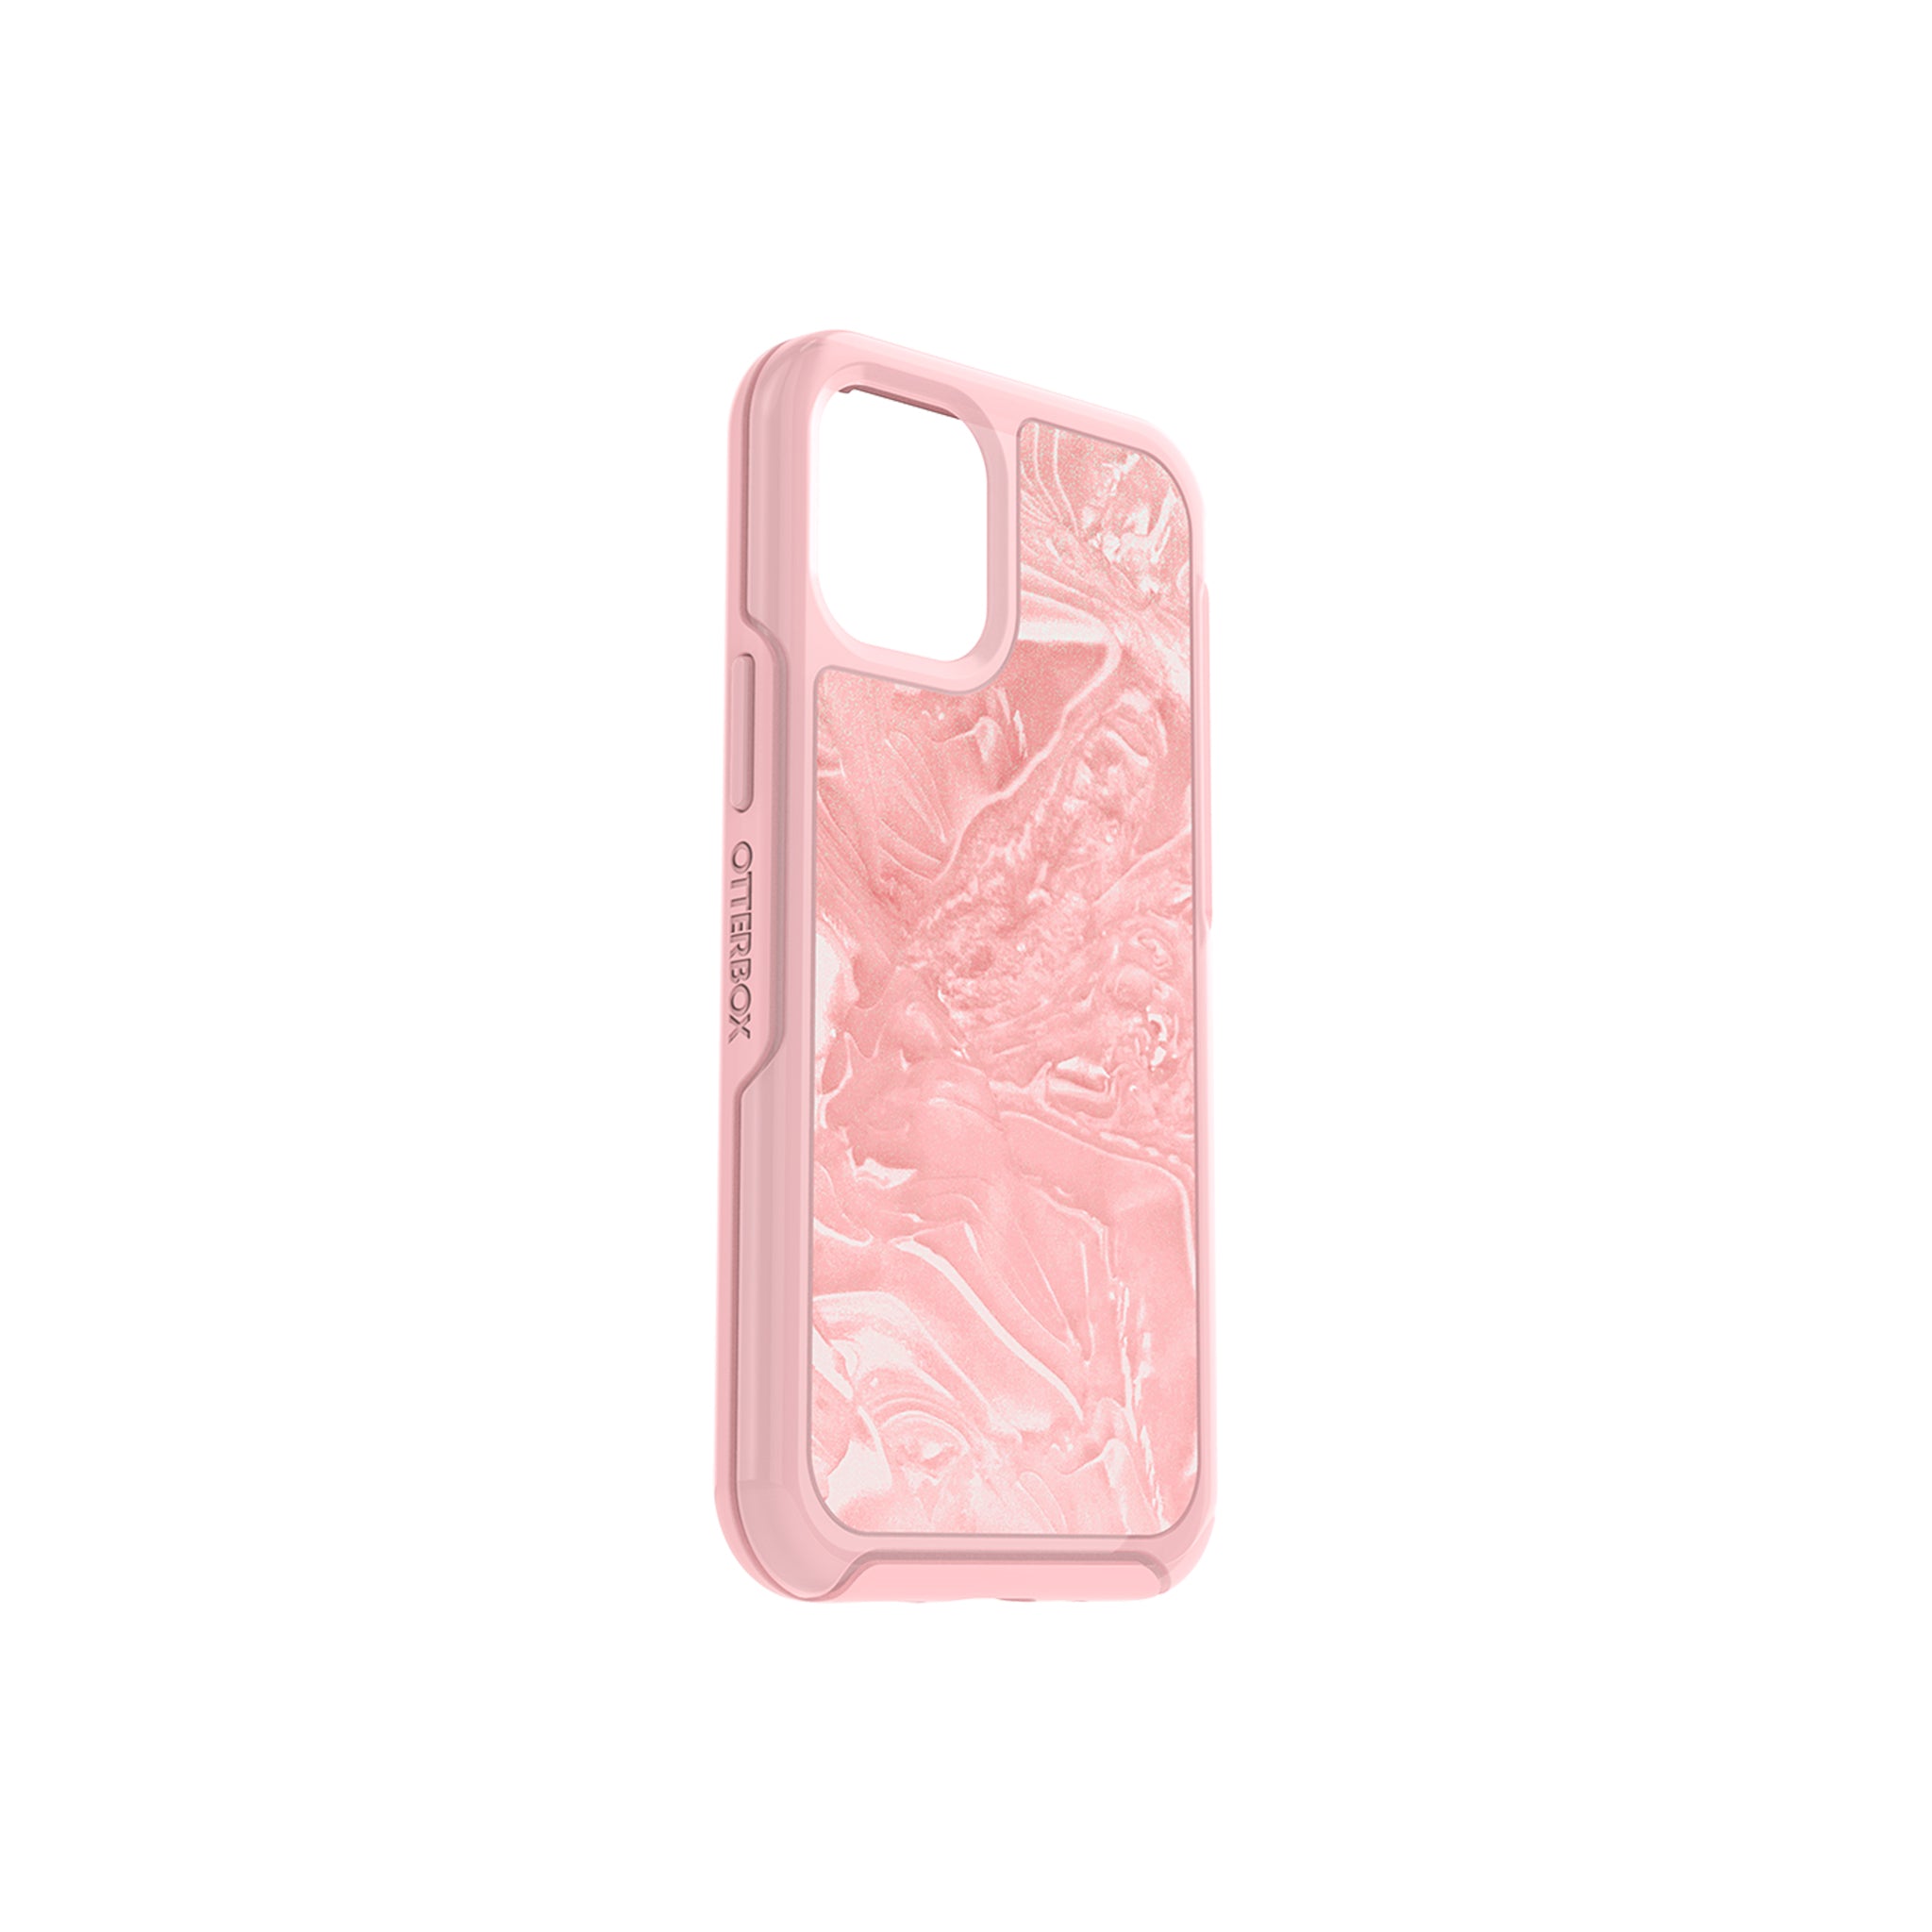 OtterBox - Symmetry Clear for Iphone 12 Mini - SHELL SHOCKED